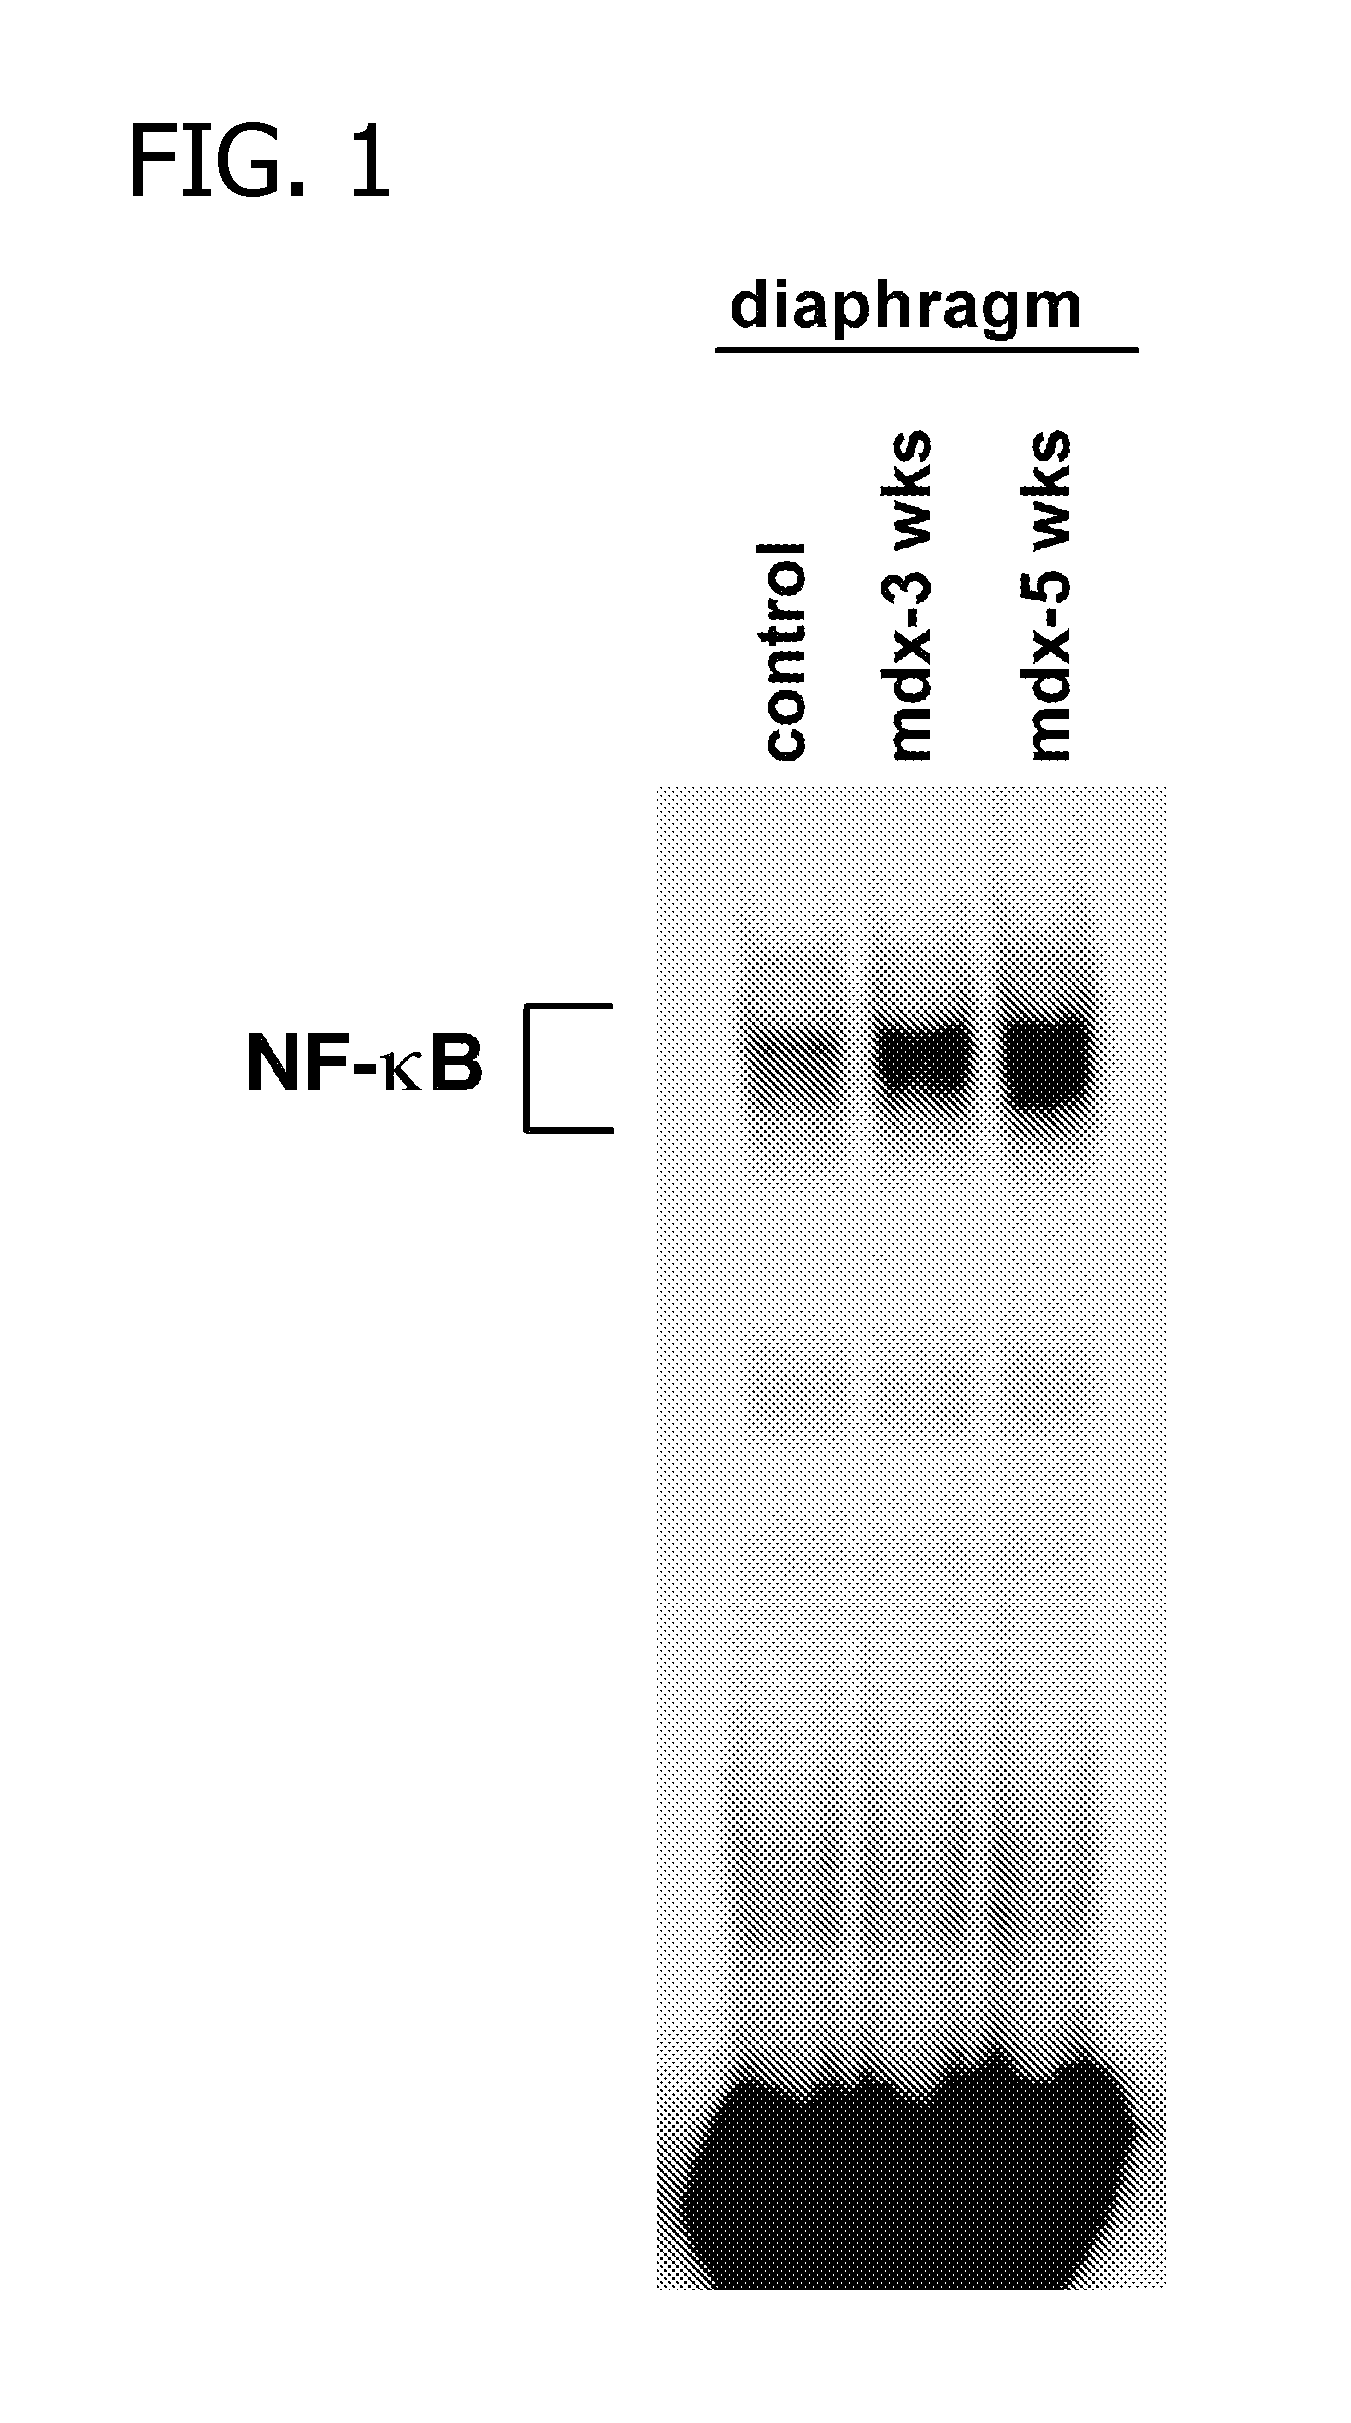 Methods of Treating Muscular Wasting Diseases Using NF-kB Activation Inhibitors